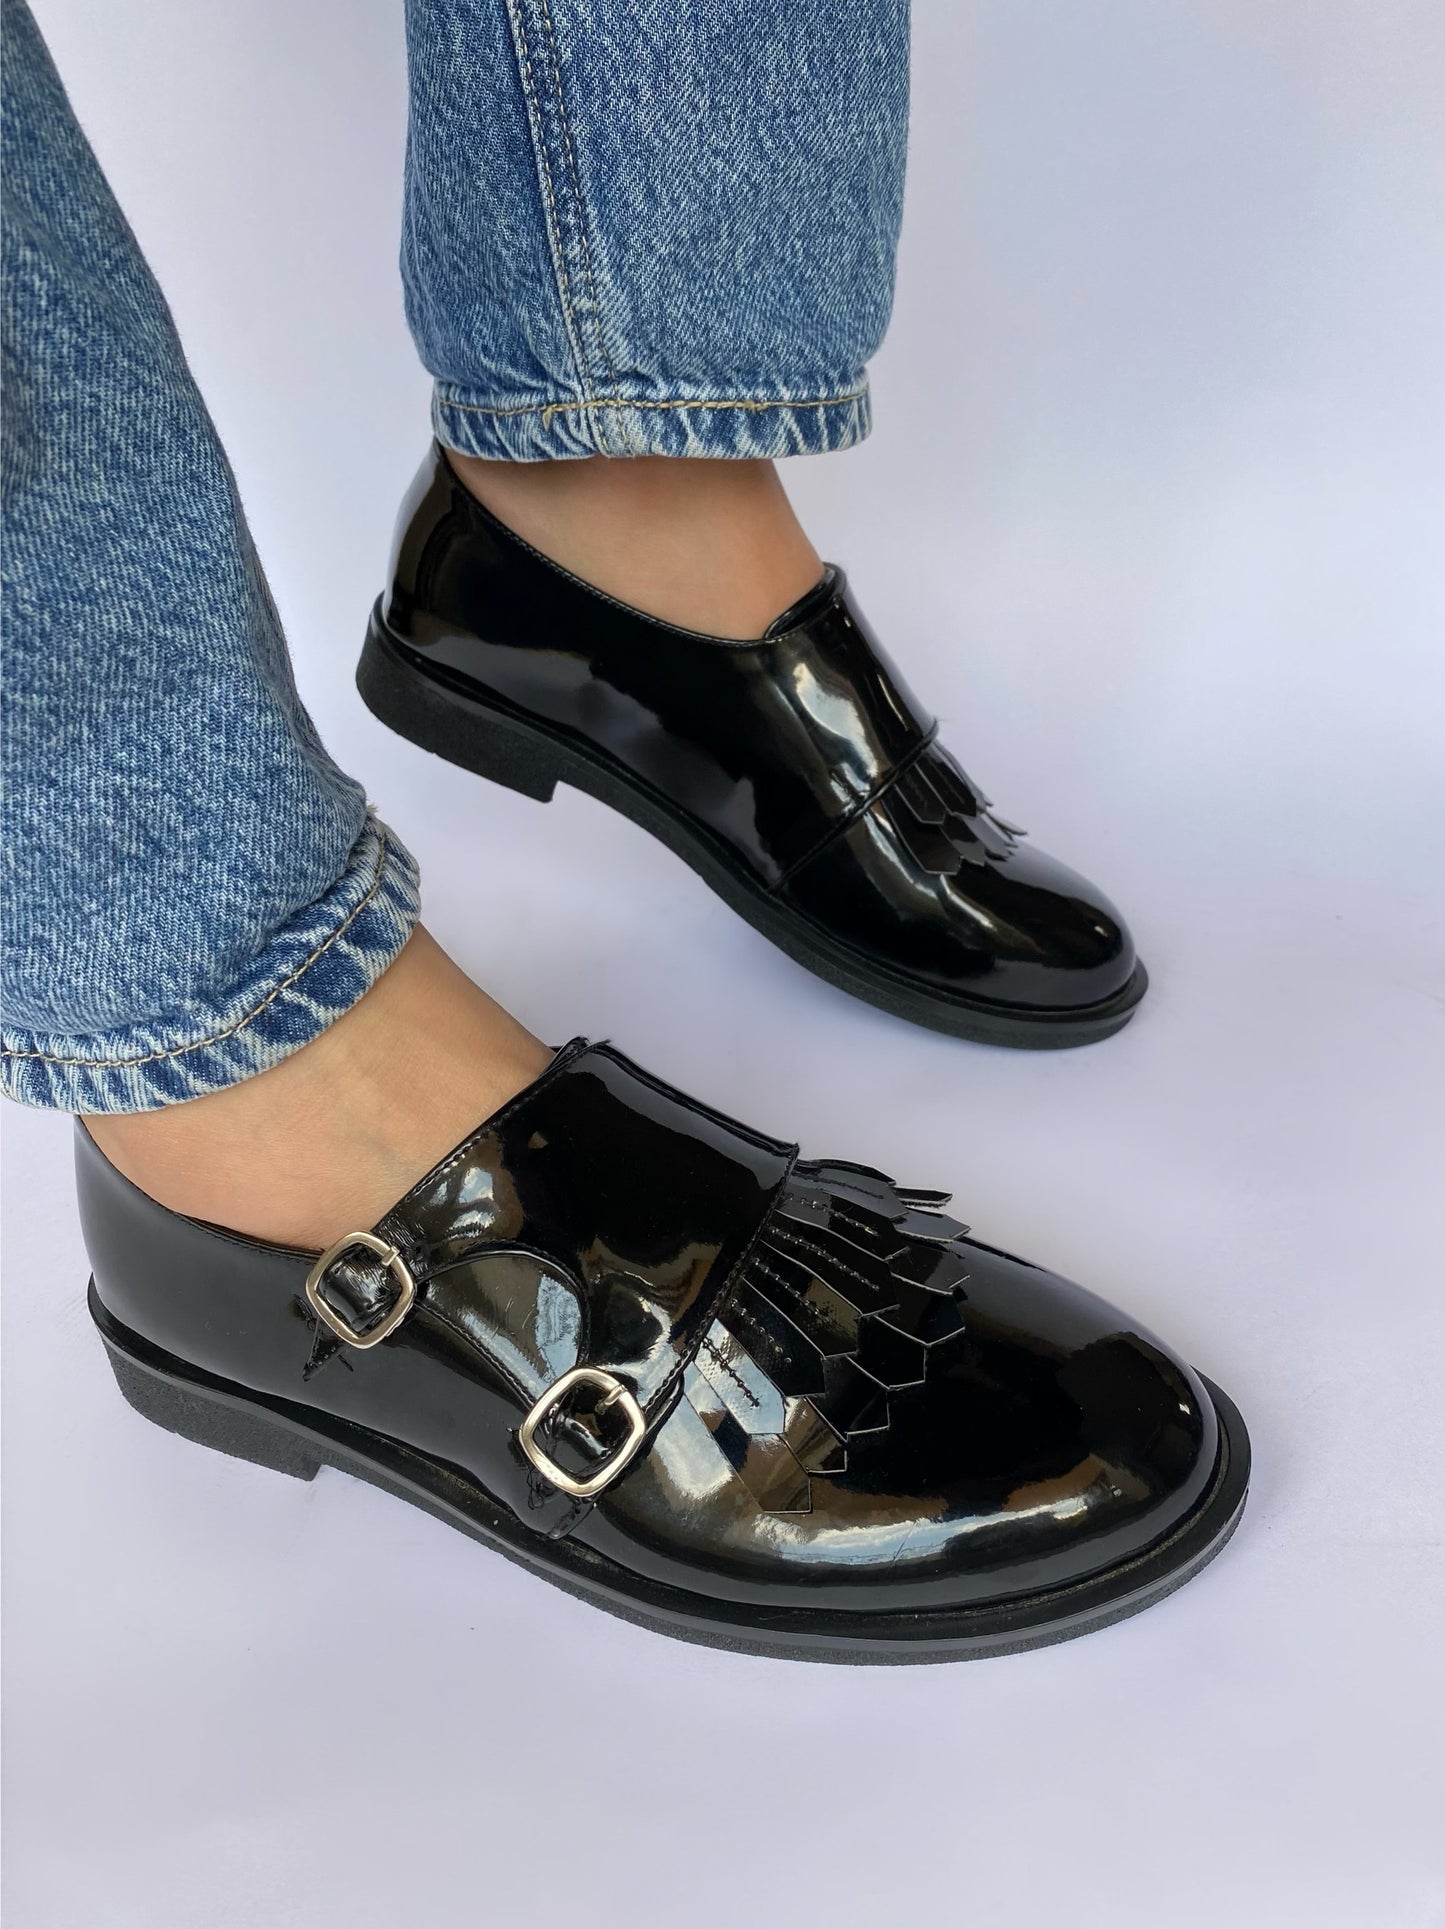 Patent Leather Double-Monk Strap Shoes